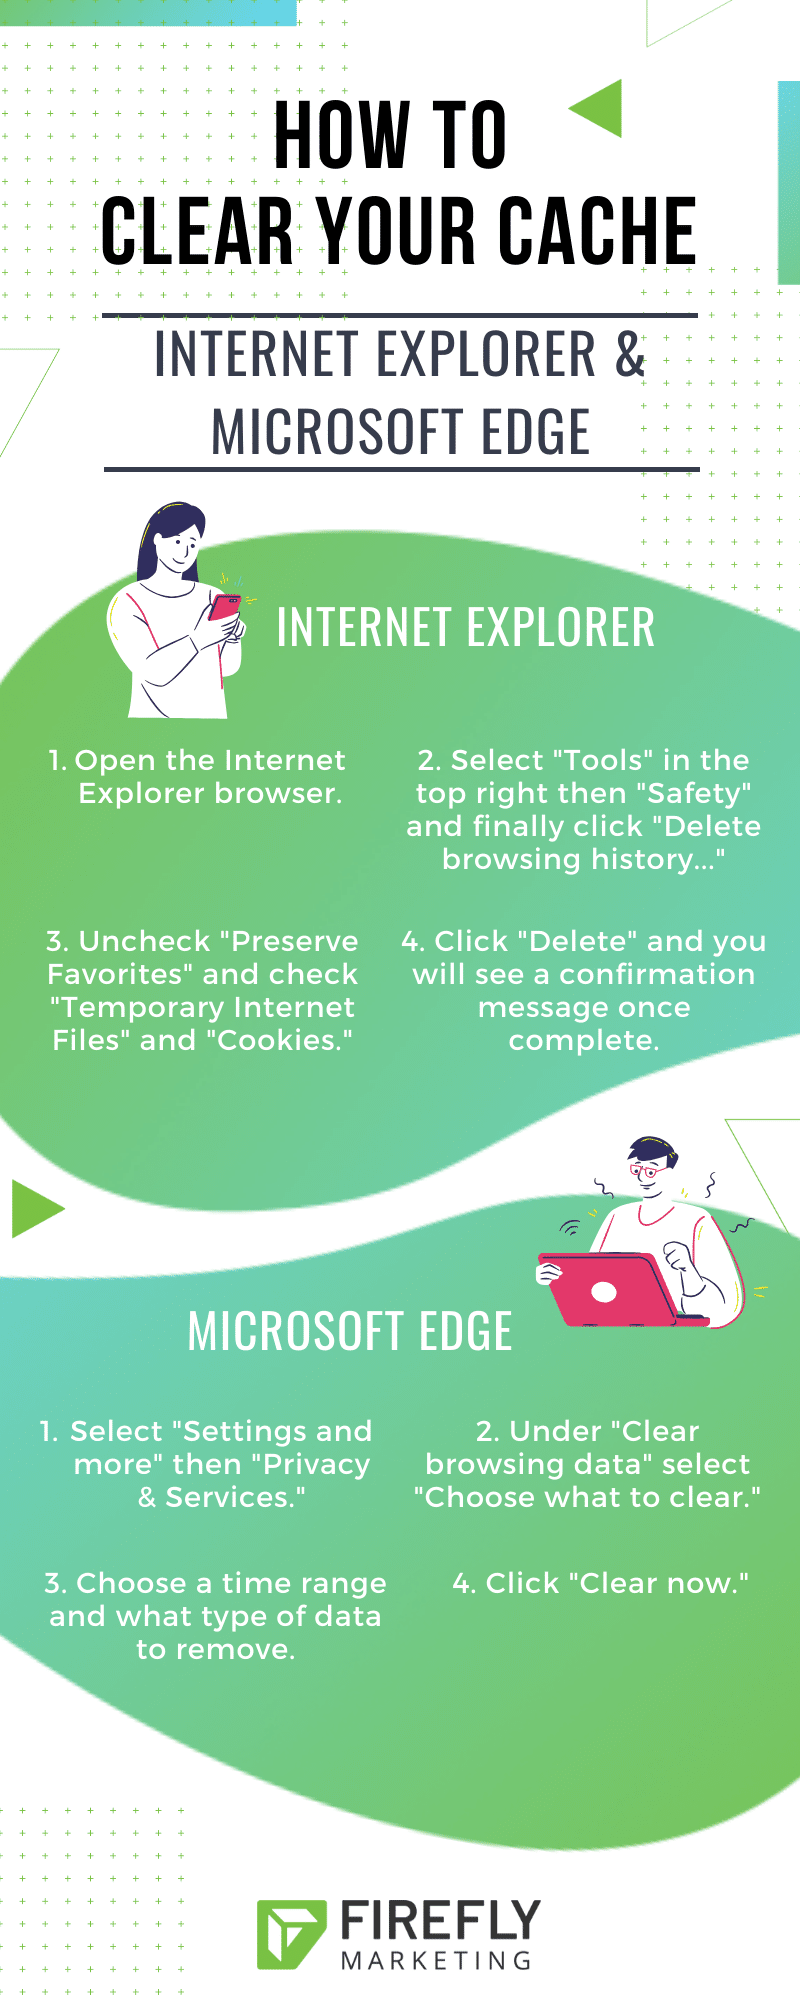 How to clear cache in Internet explorer and Microsoft Edge